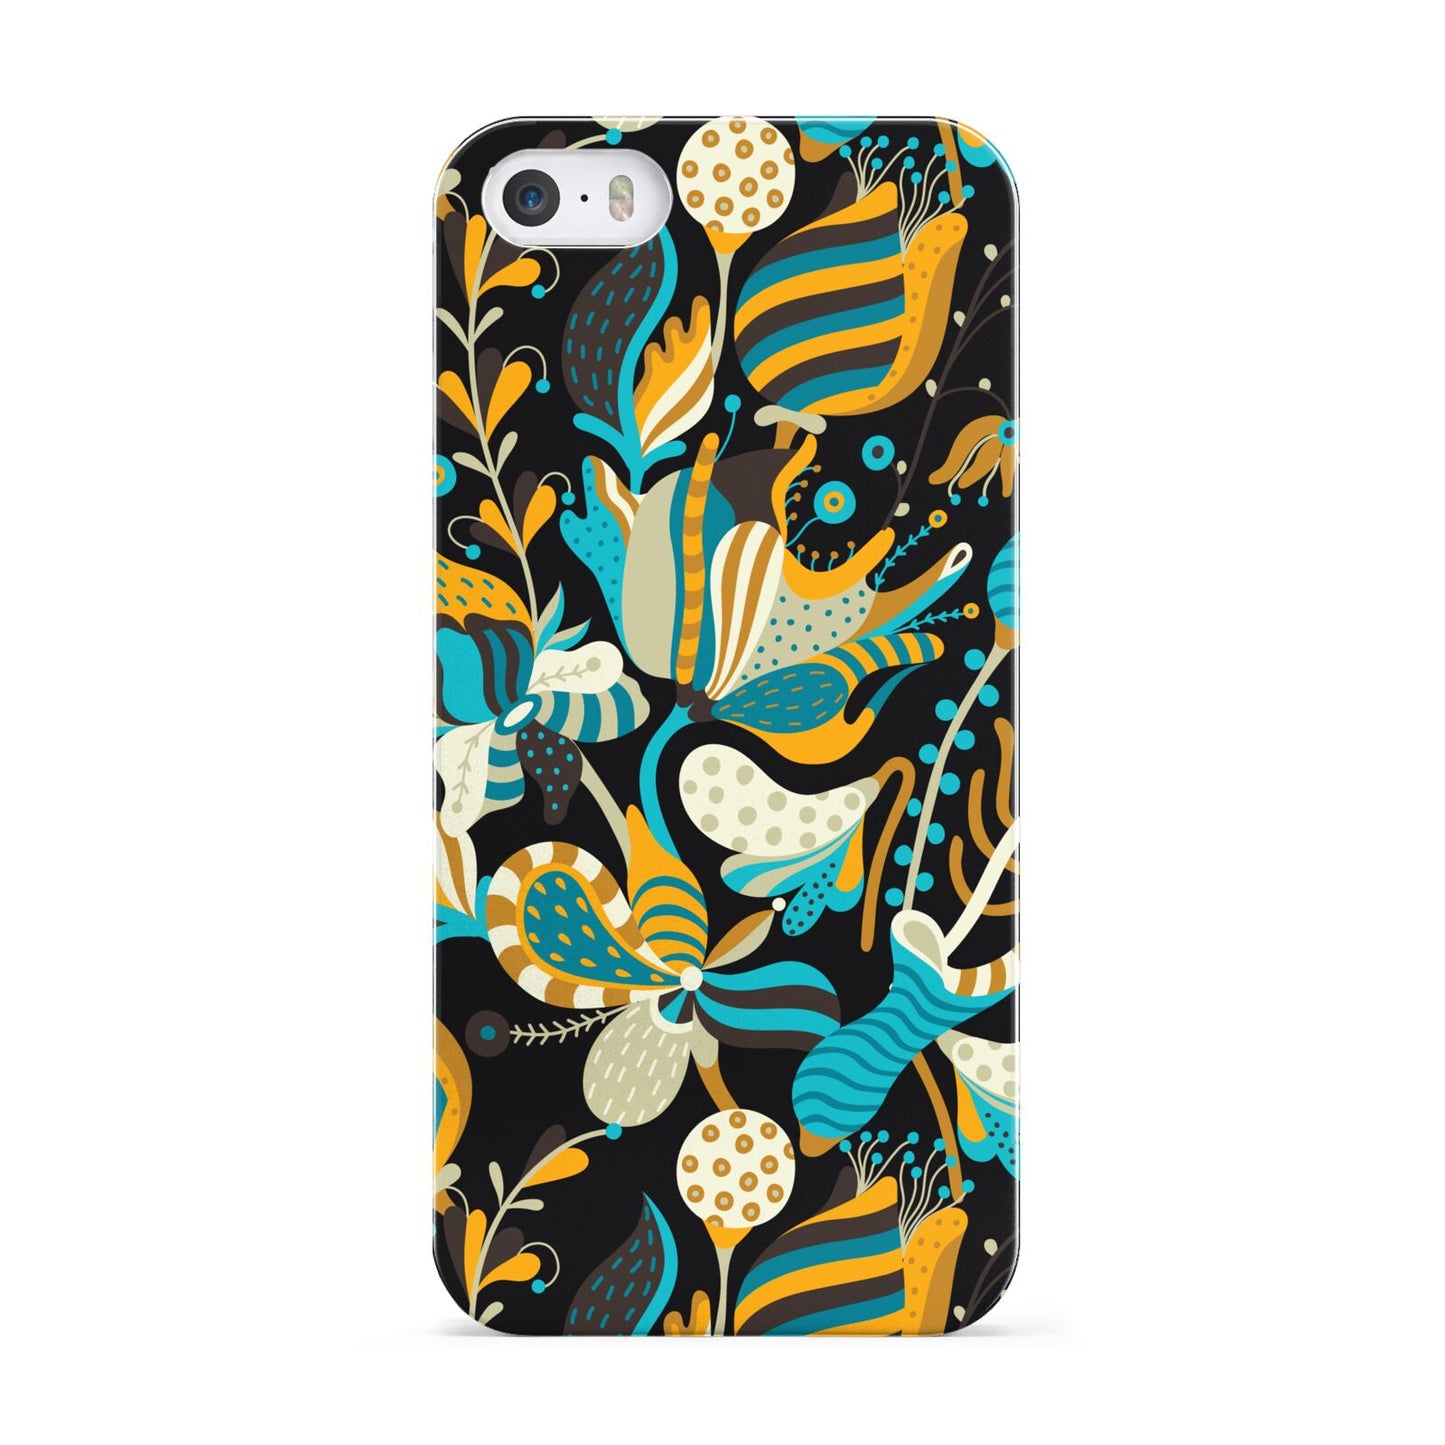 Colourful Floral Apple iPhone 5 Case